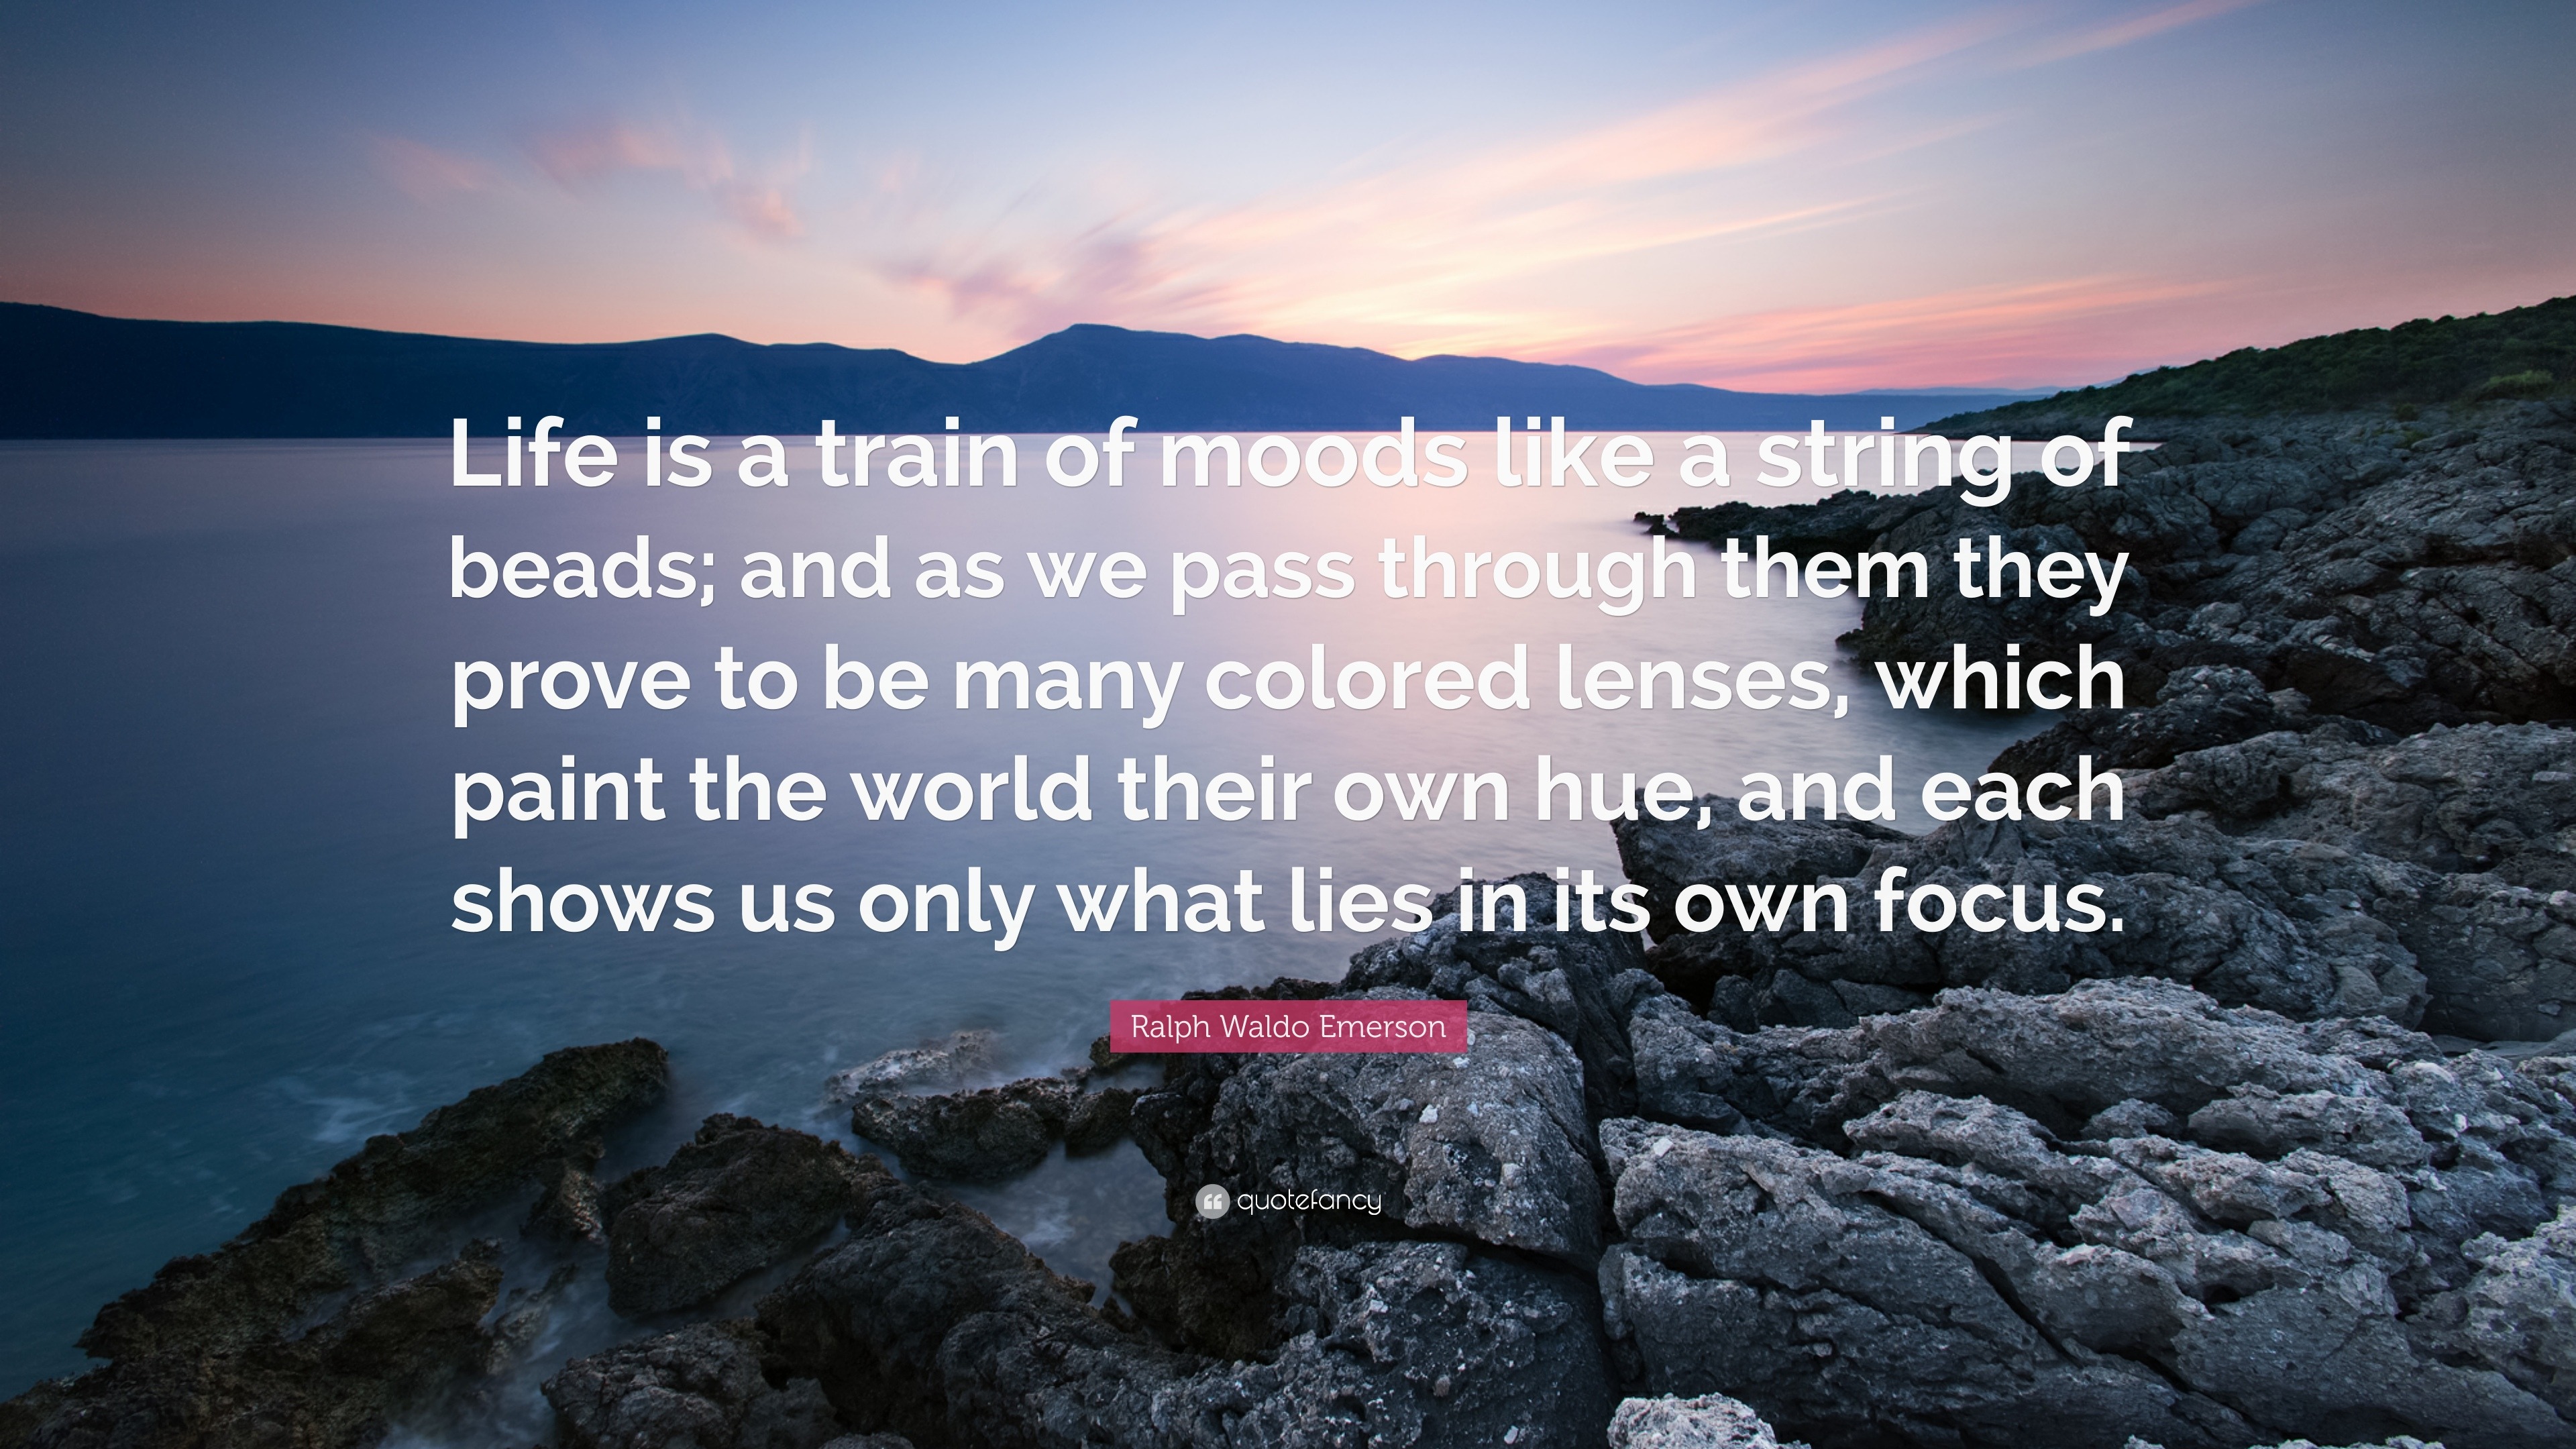 Ralph Waldo Emerson Quote “Life is a train of moods like a string of